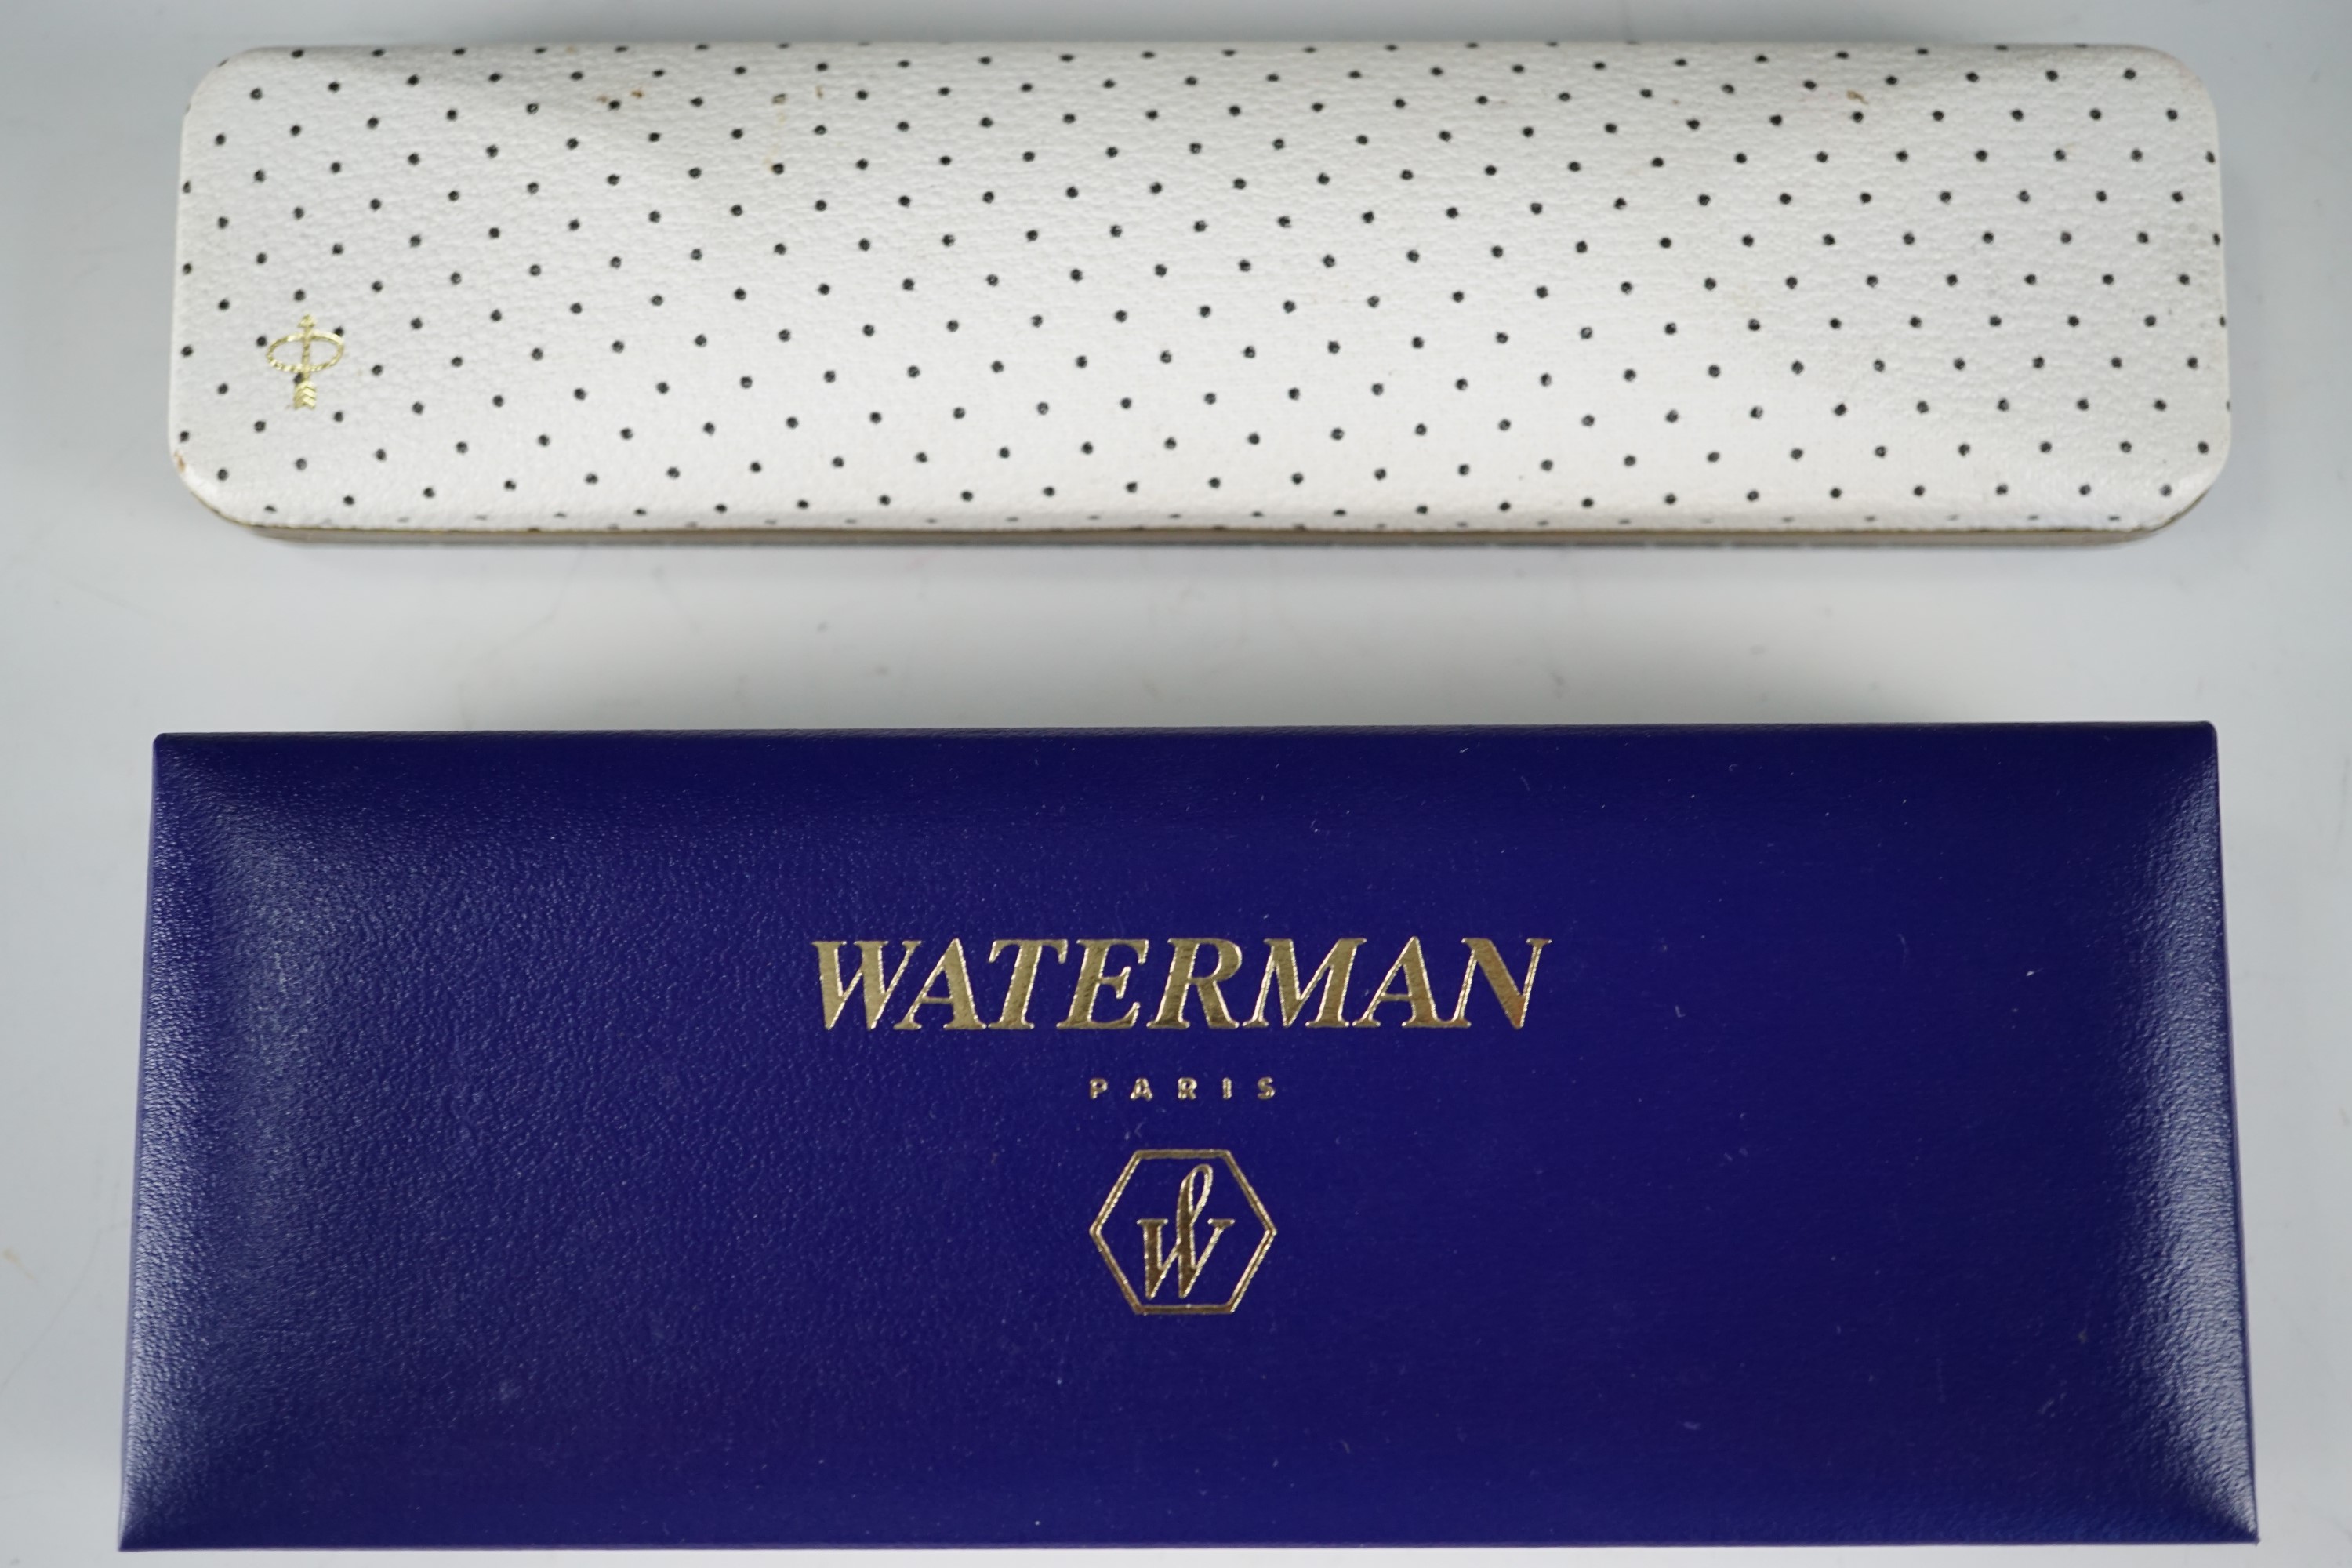 Parker 61 and Waterman fountain pens